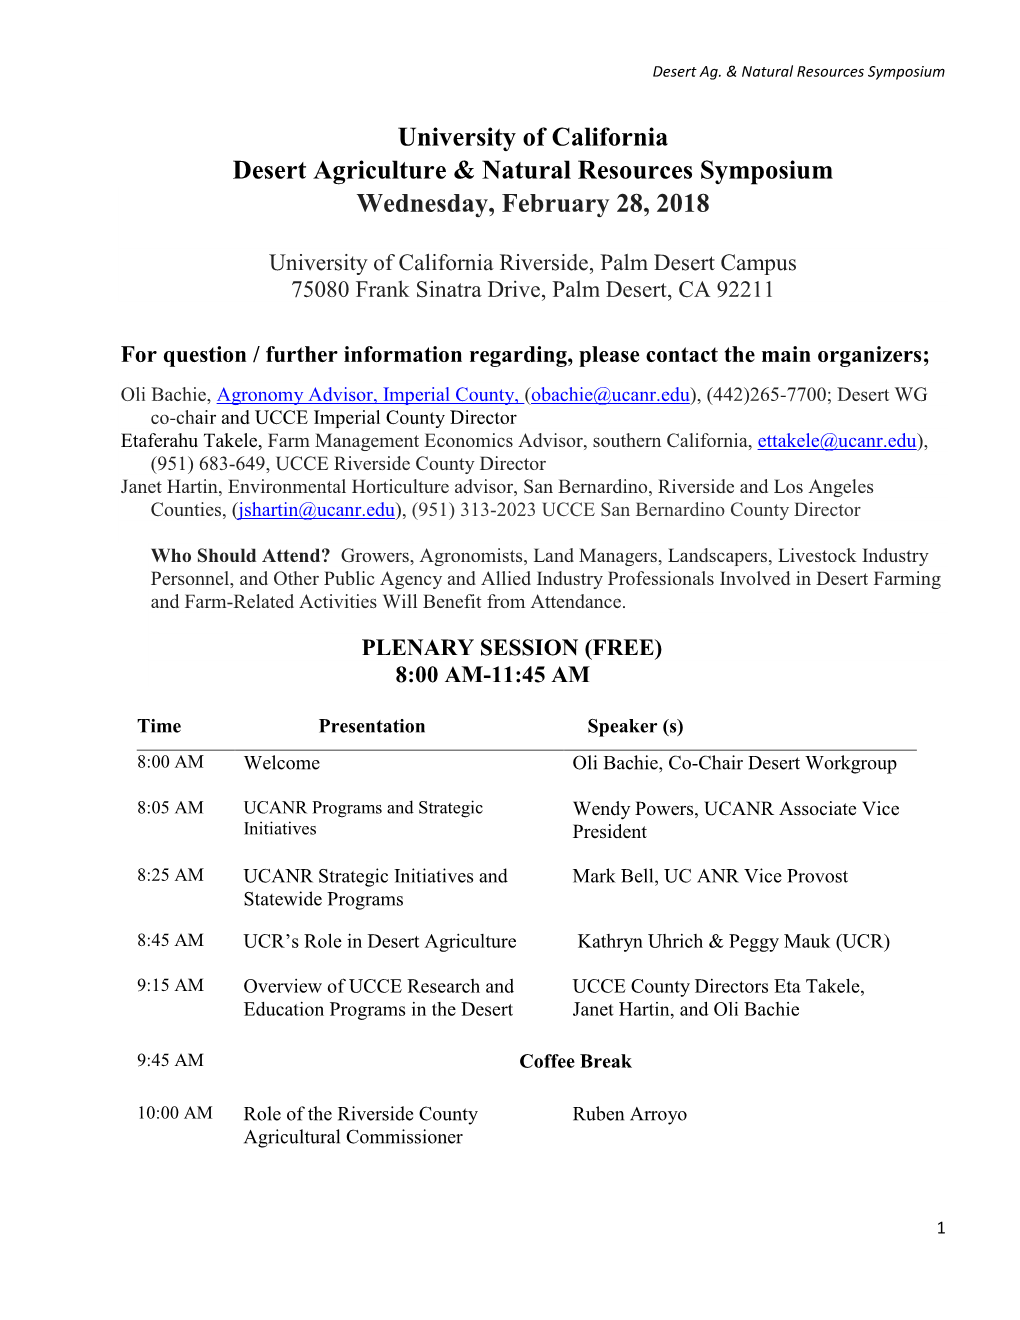 University of California Desert Agriculture & Natural Resources Symposium Wednesday, February 28, 2018